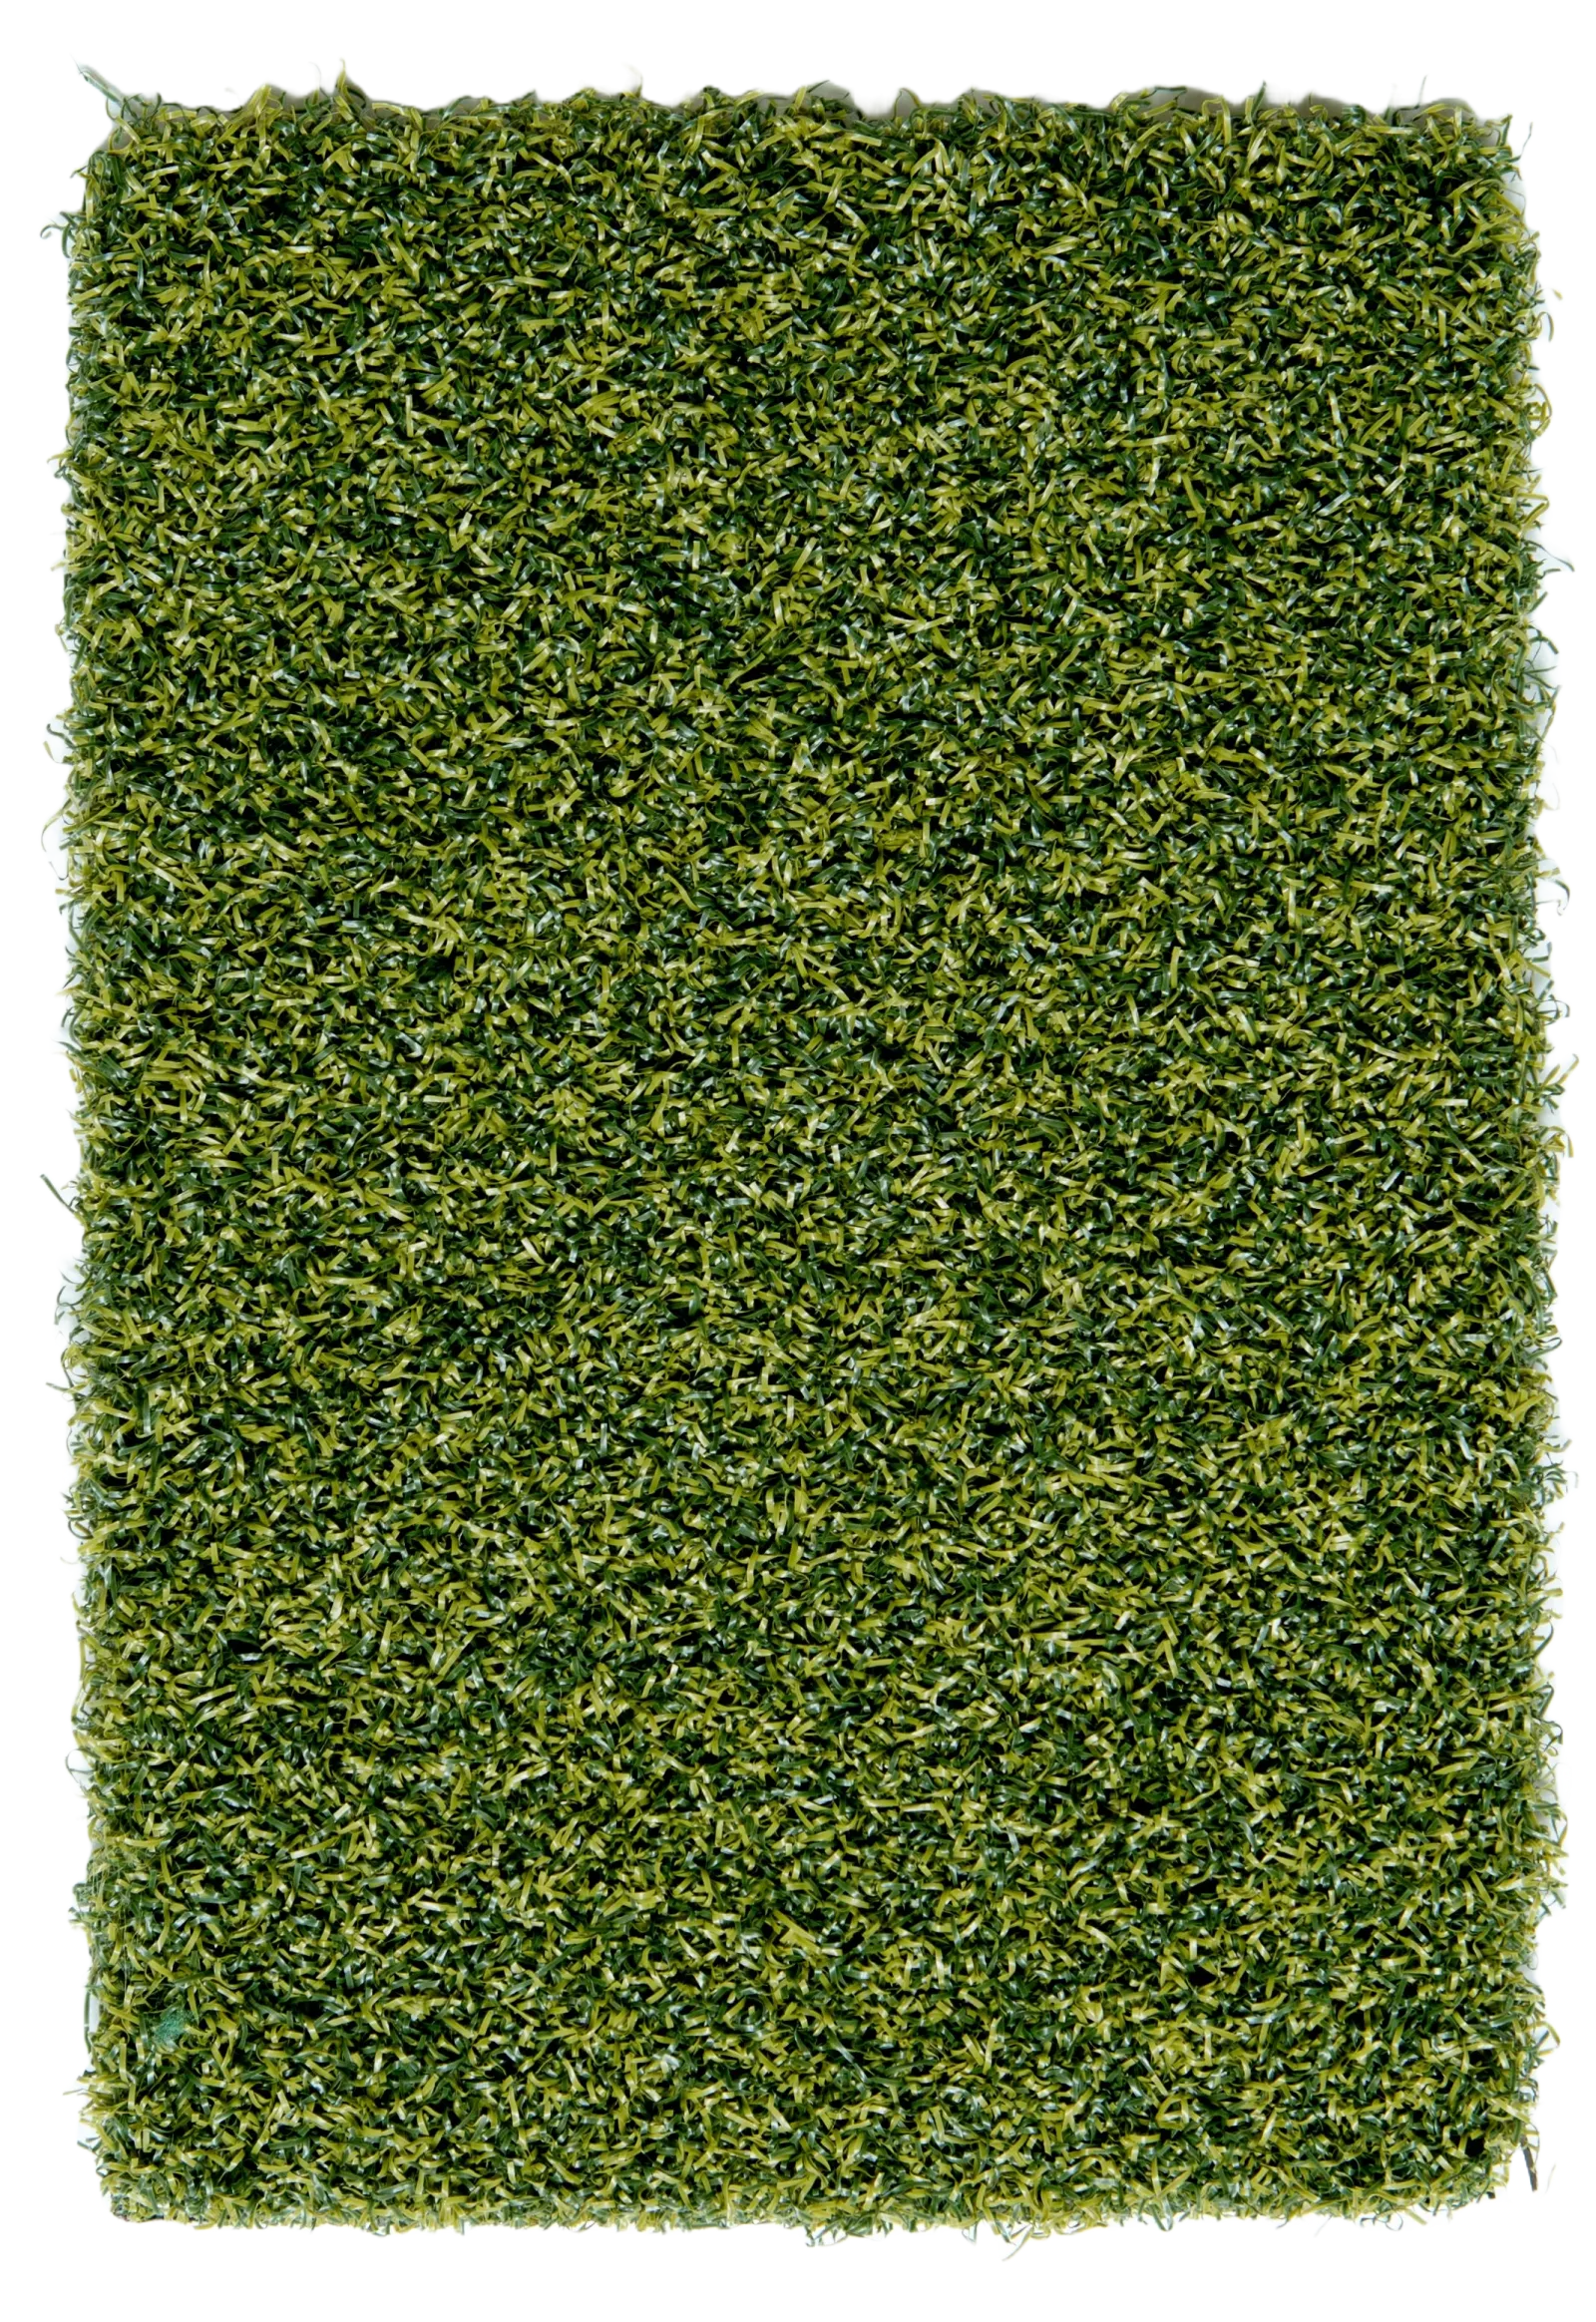 a close up of a green rug